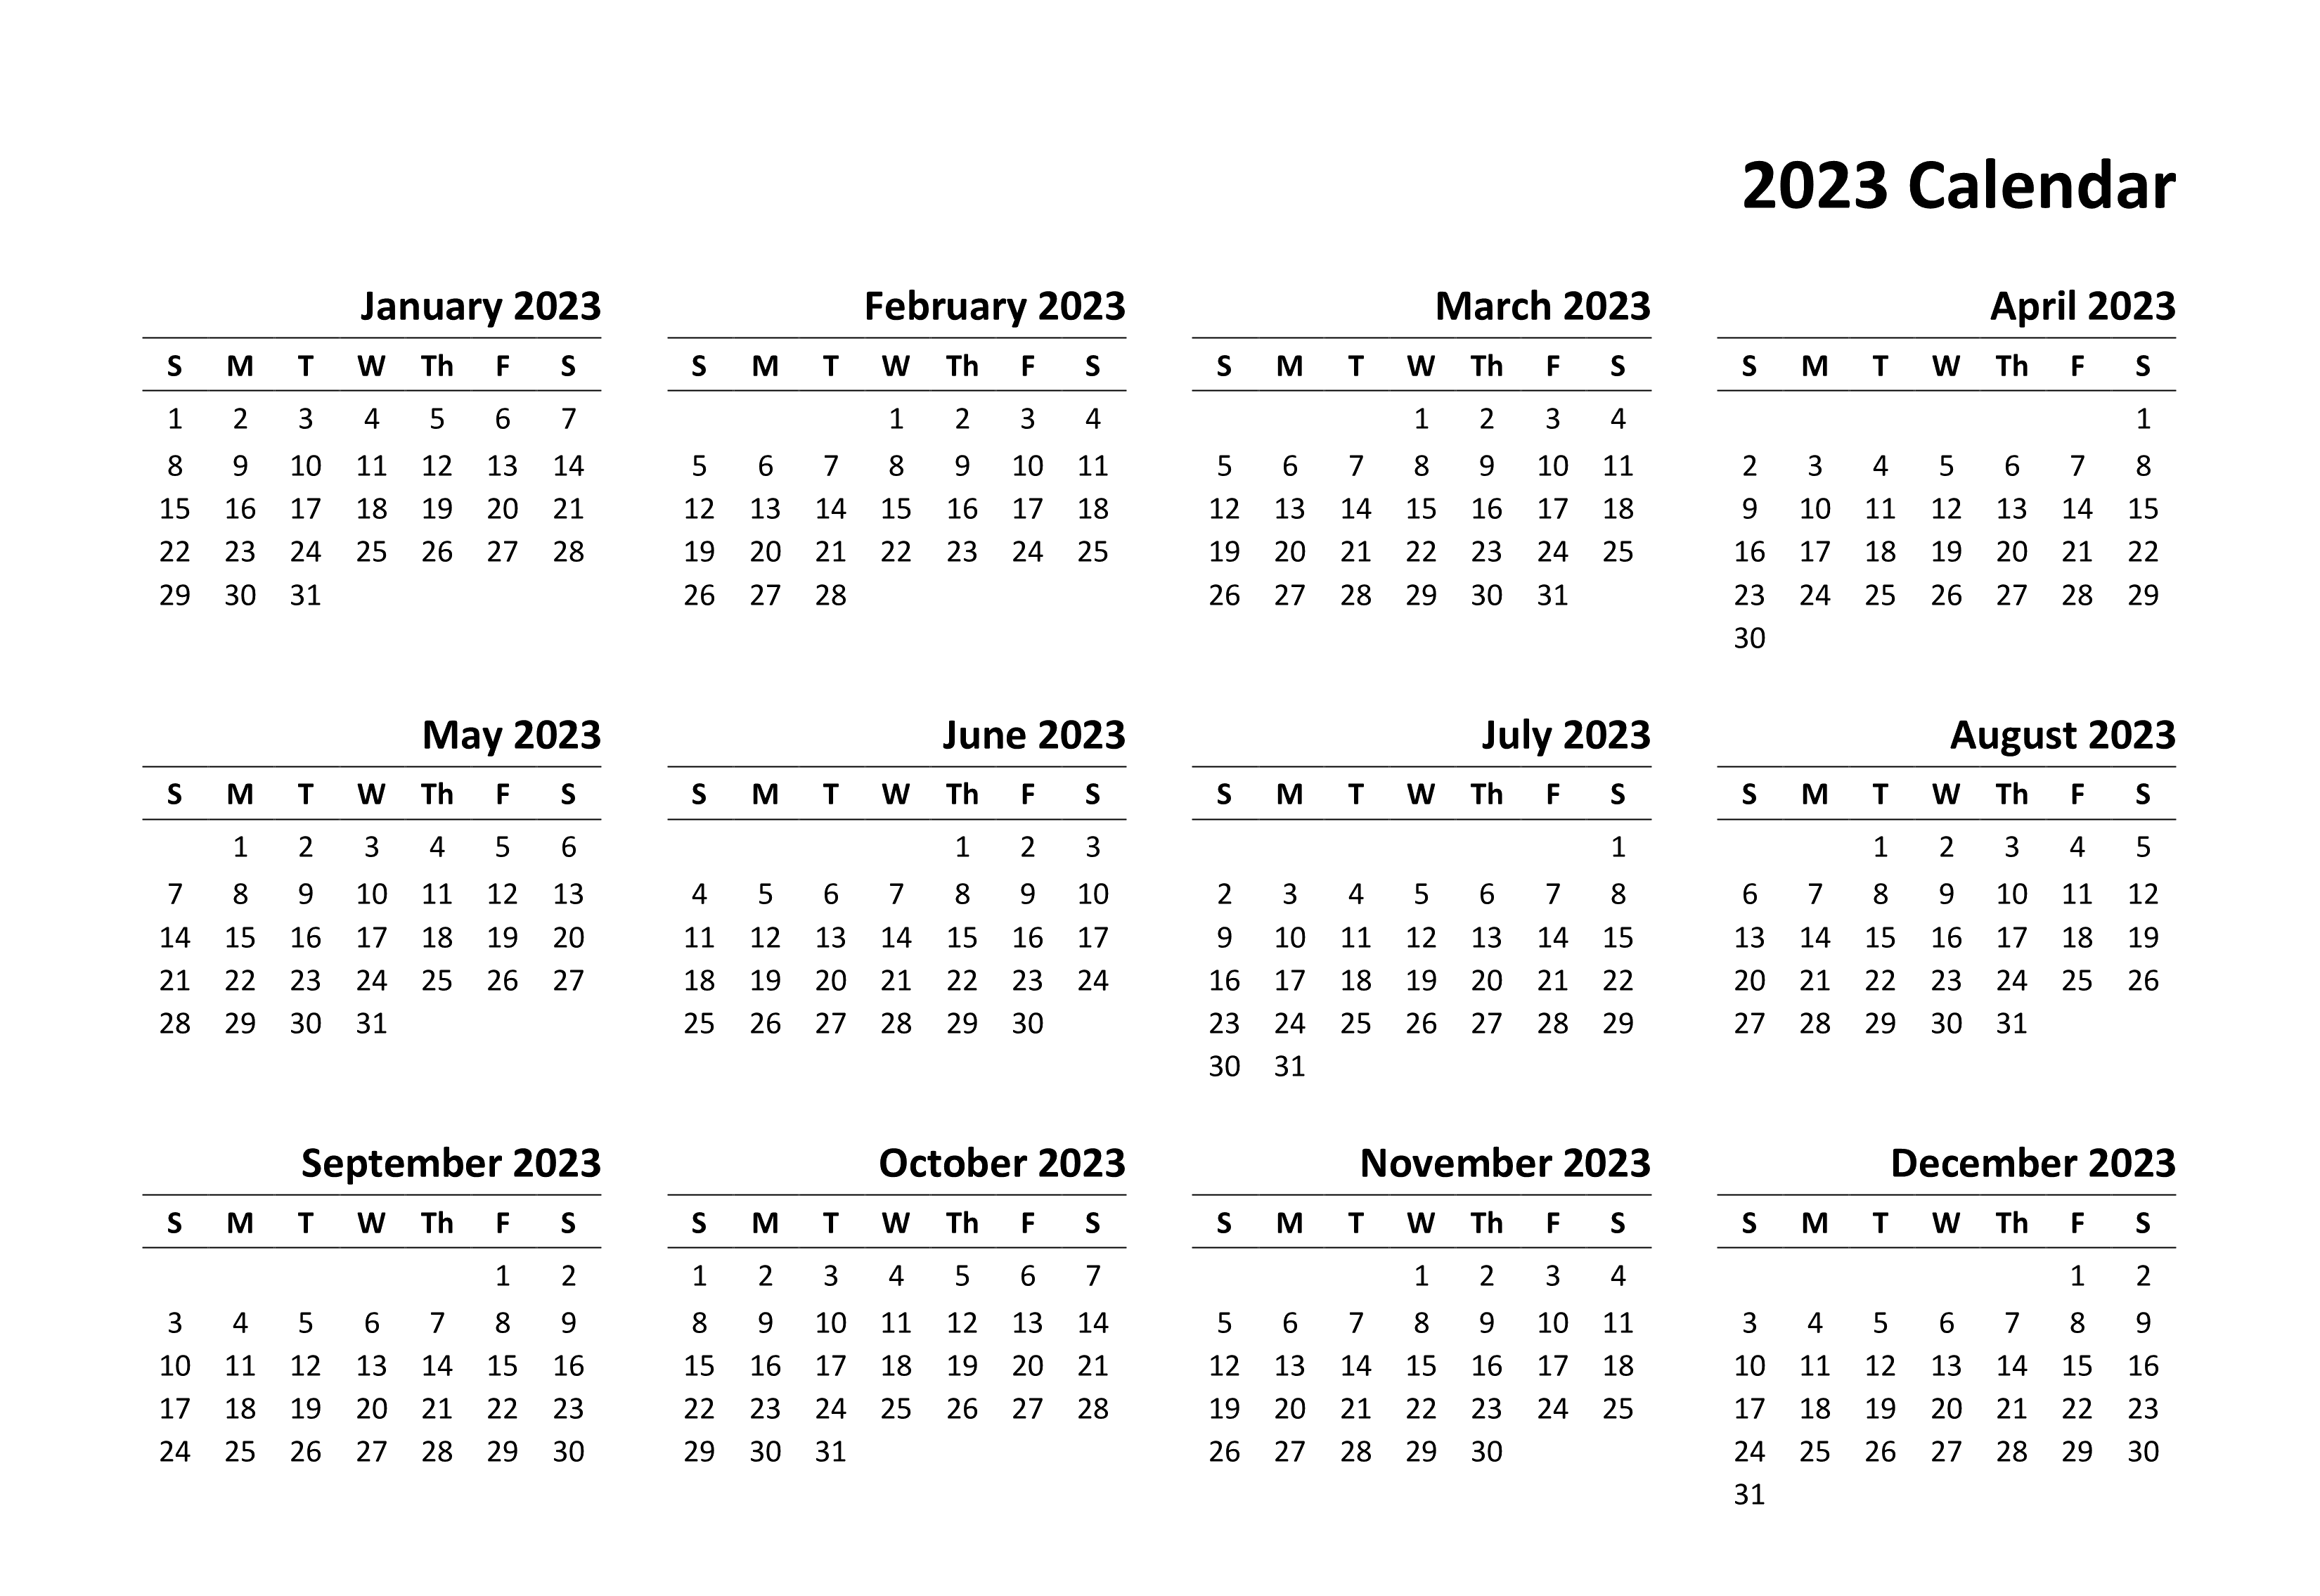 Calendar 2023 PNG Picture